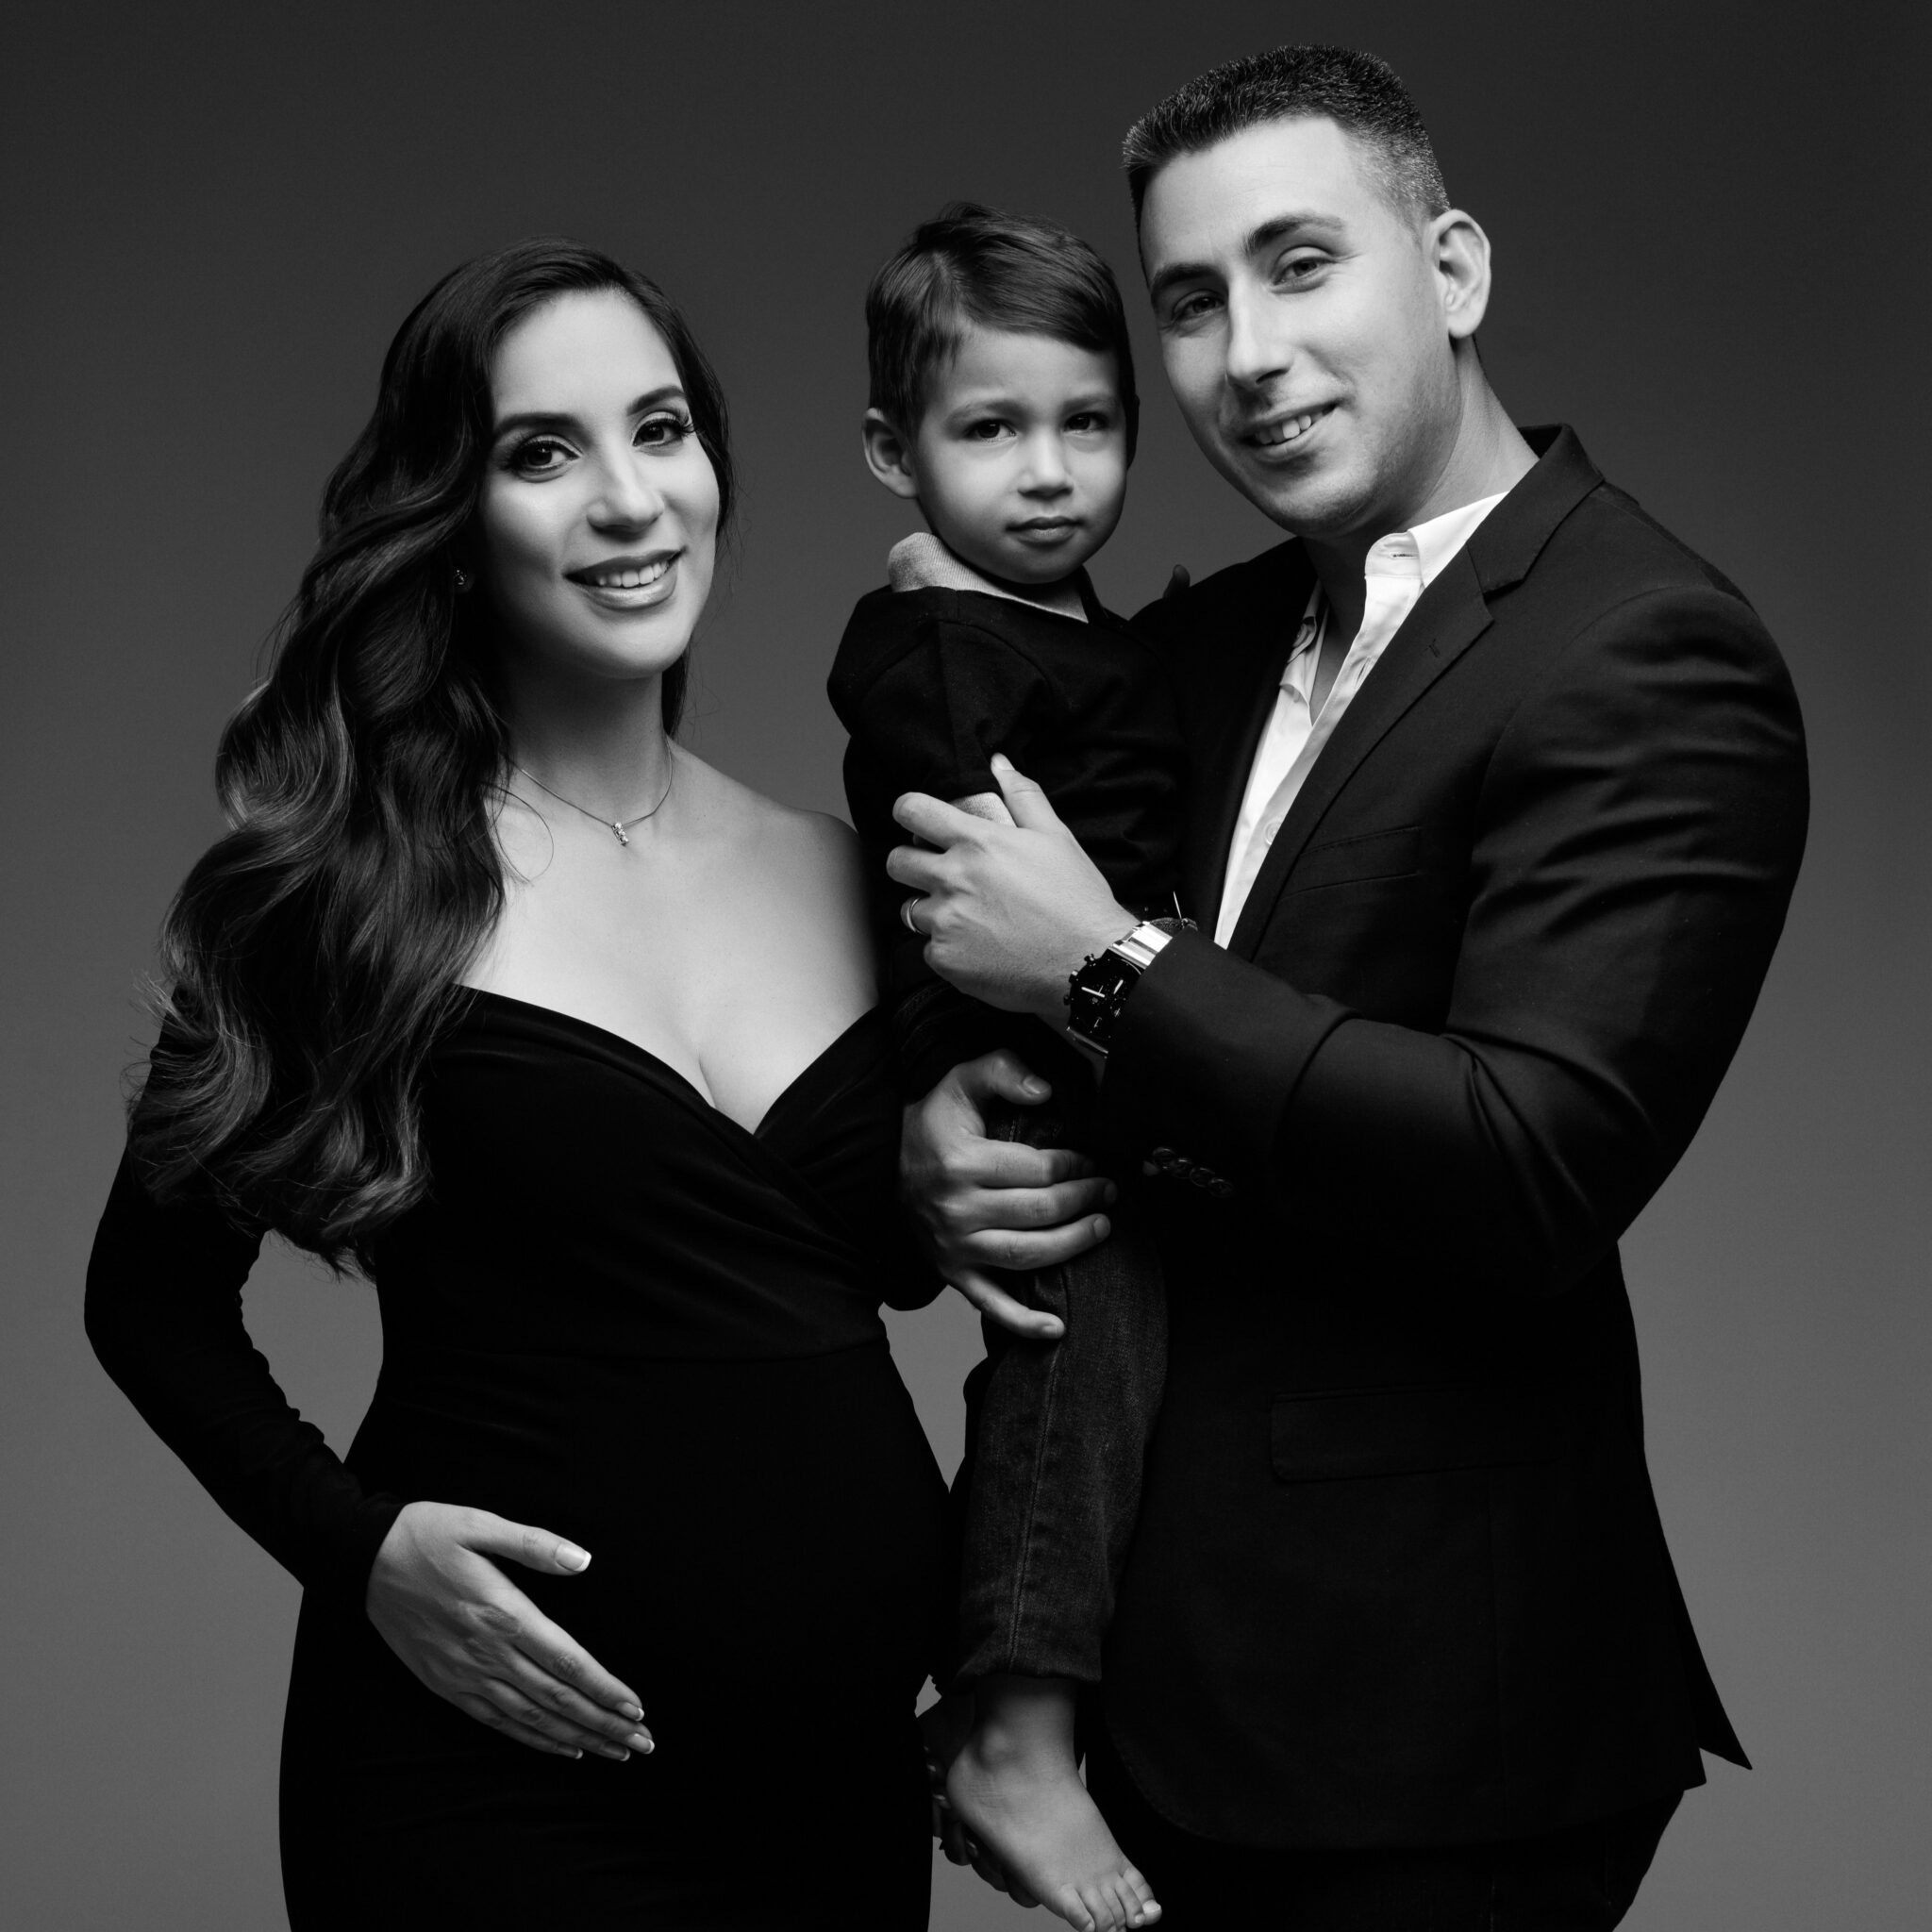 Black and white maternity portrait of family wearing all black formal attire, with the father holding the son and the expecting mother holding a hand on her baby bump.